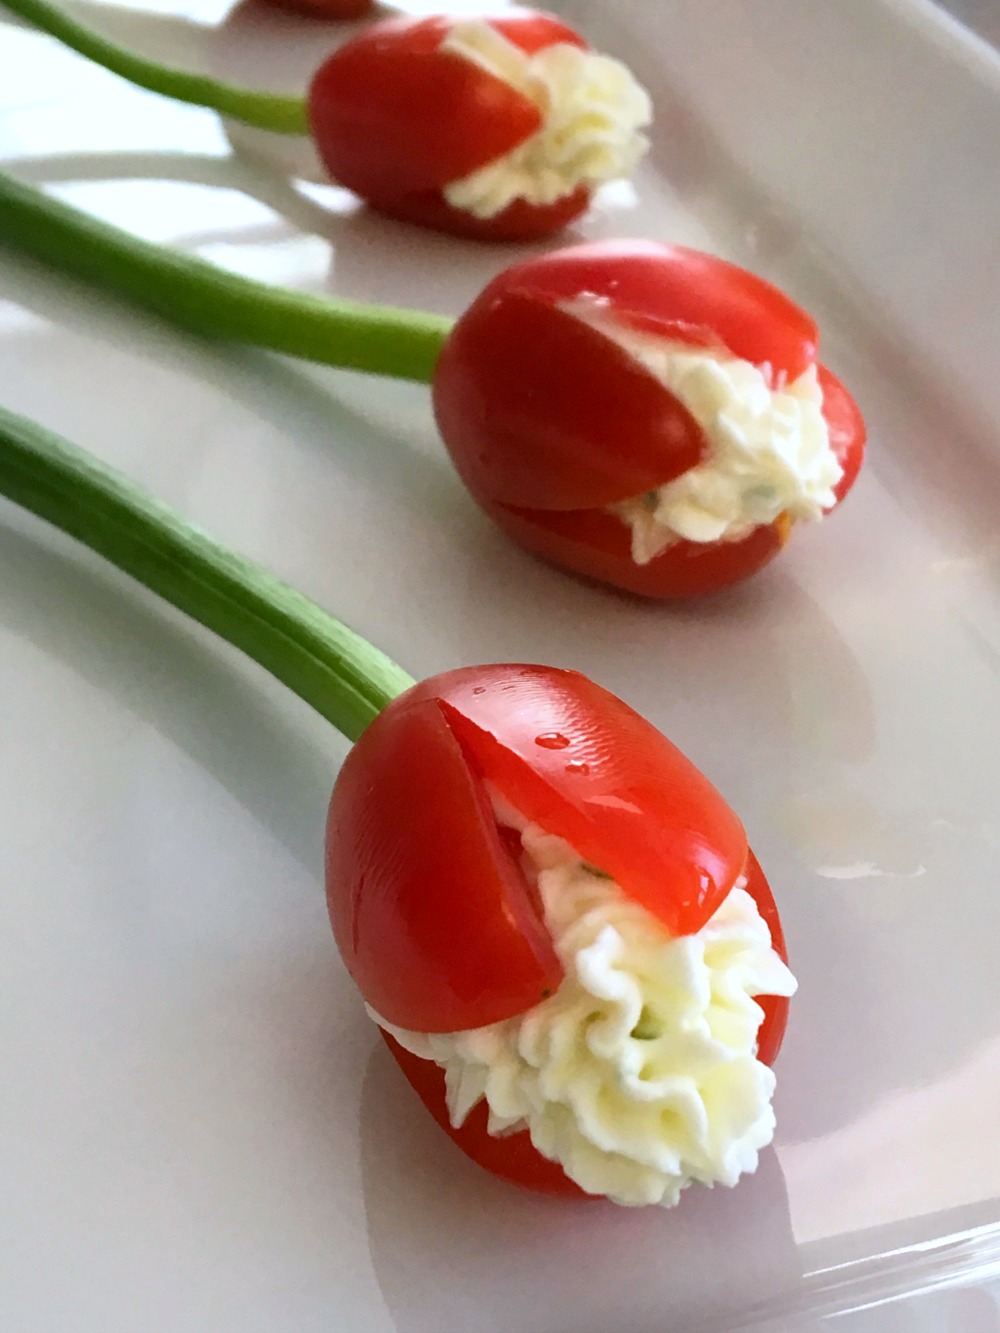 Grape Tomato Cream Cheese Tulips: A bunch of edible Tomato Tulips stuffed with garlicky chive cream cheese makes a pretty appetizer centerpiece for a special meal, a shower or party, or Mother’s Day. 